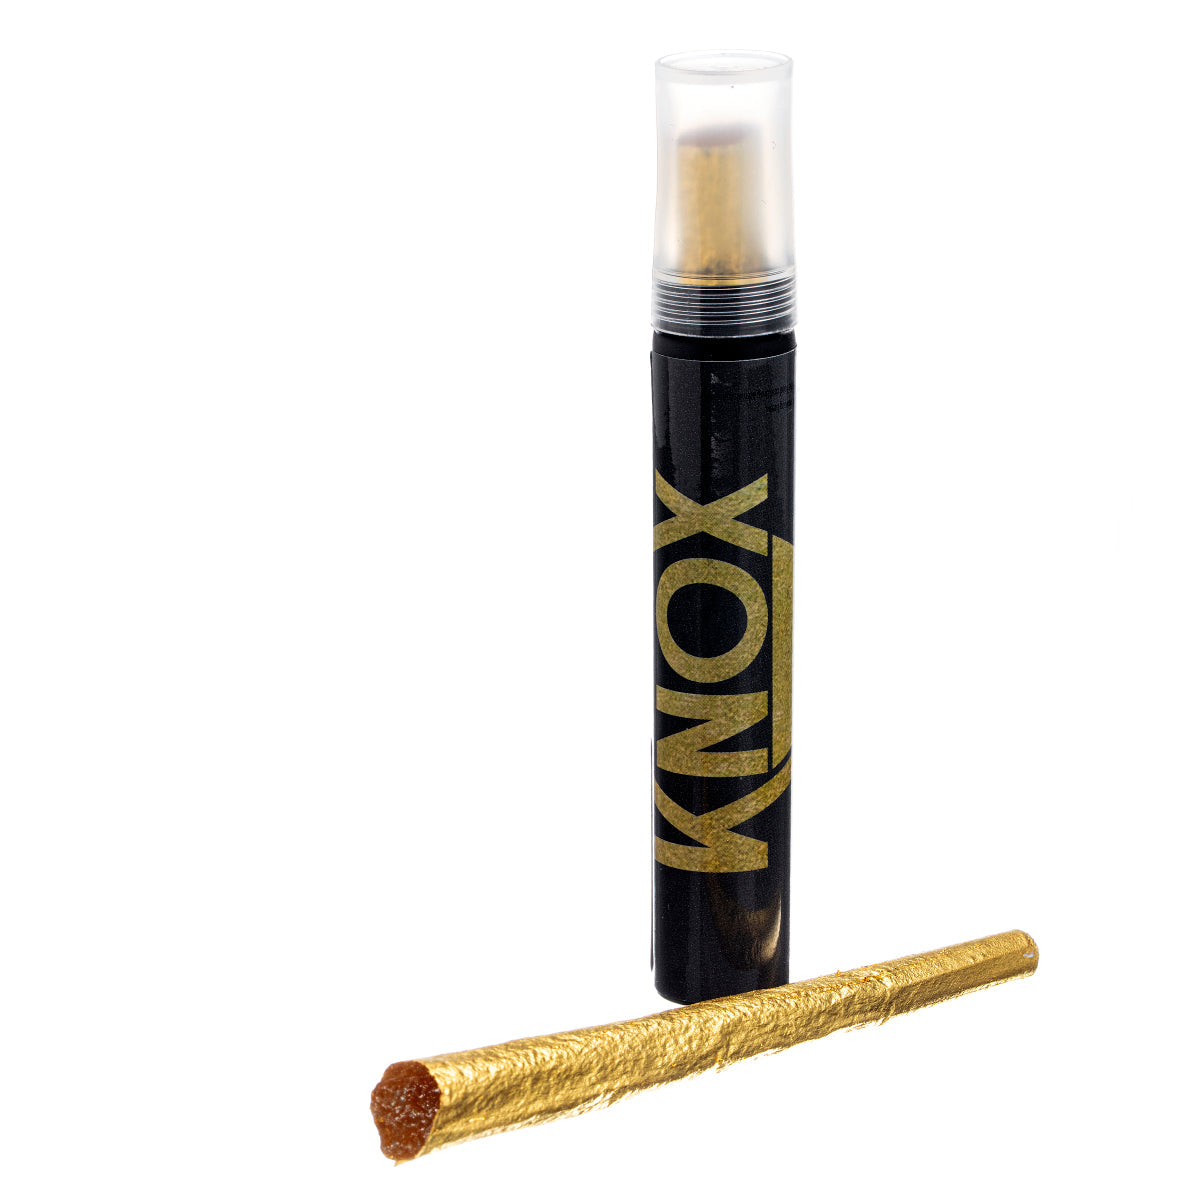 Knox 24K Gold King Size Cone - (1 Count)